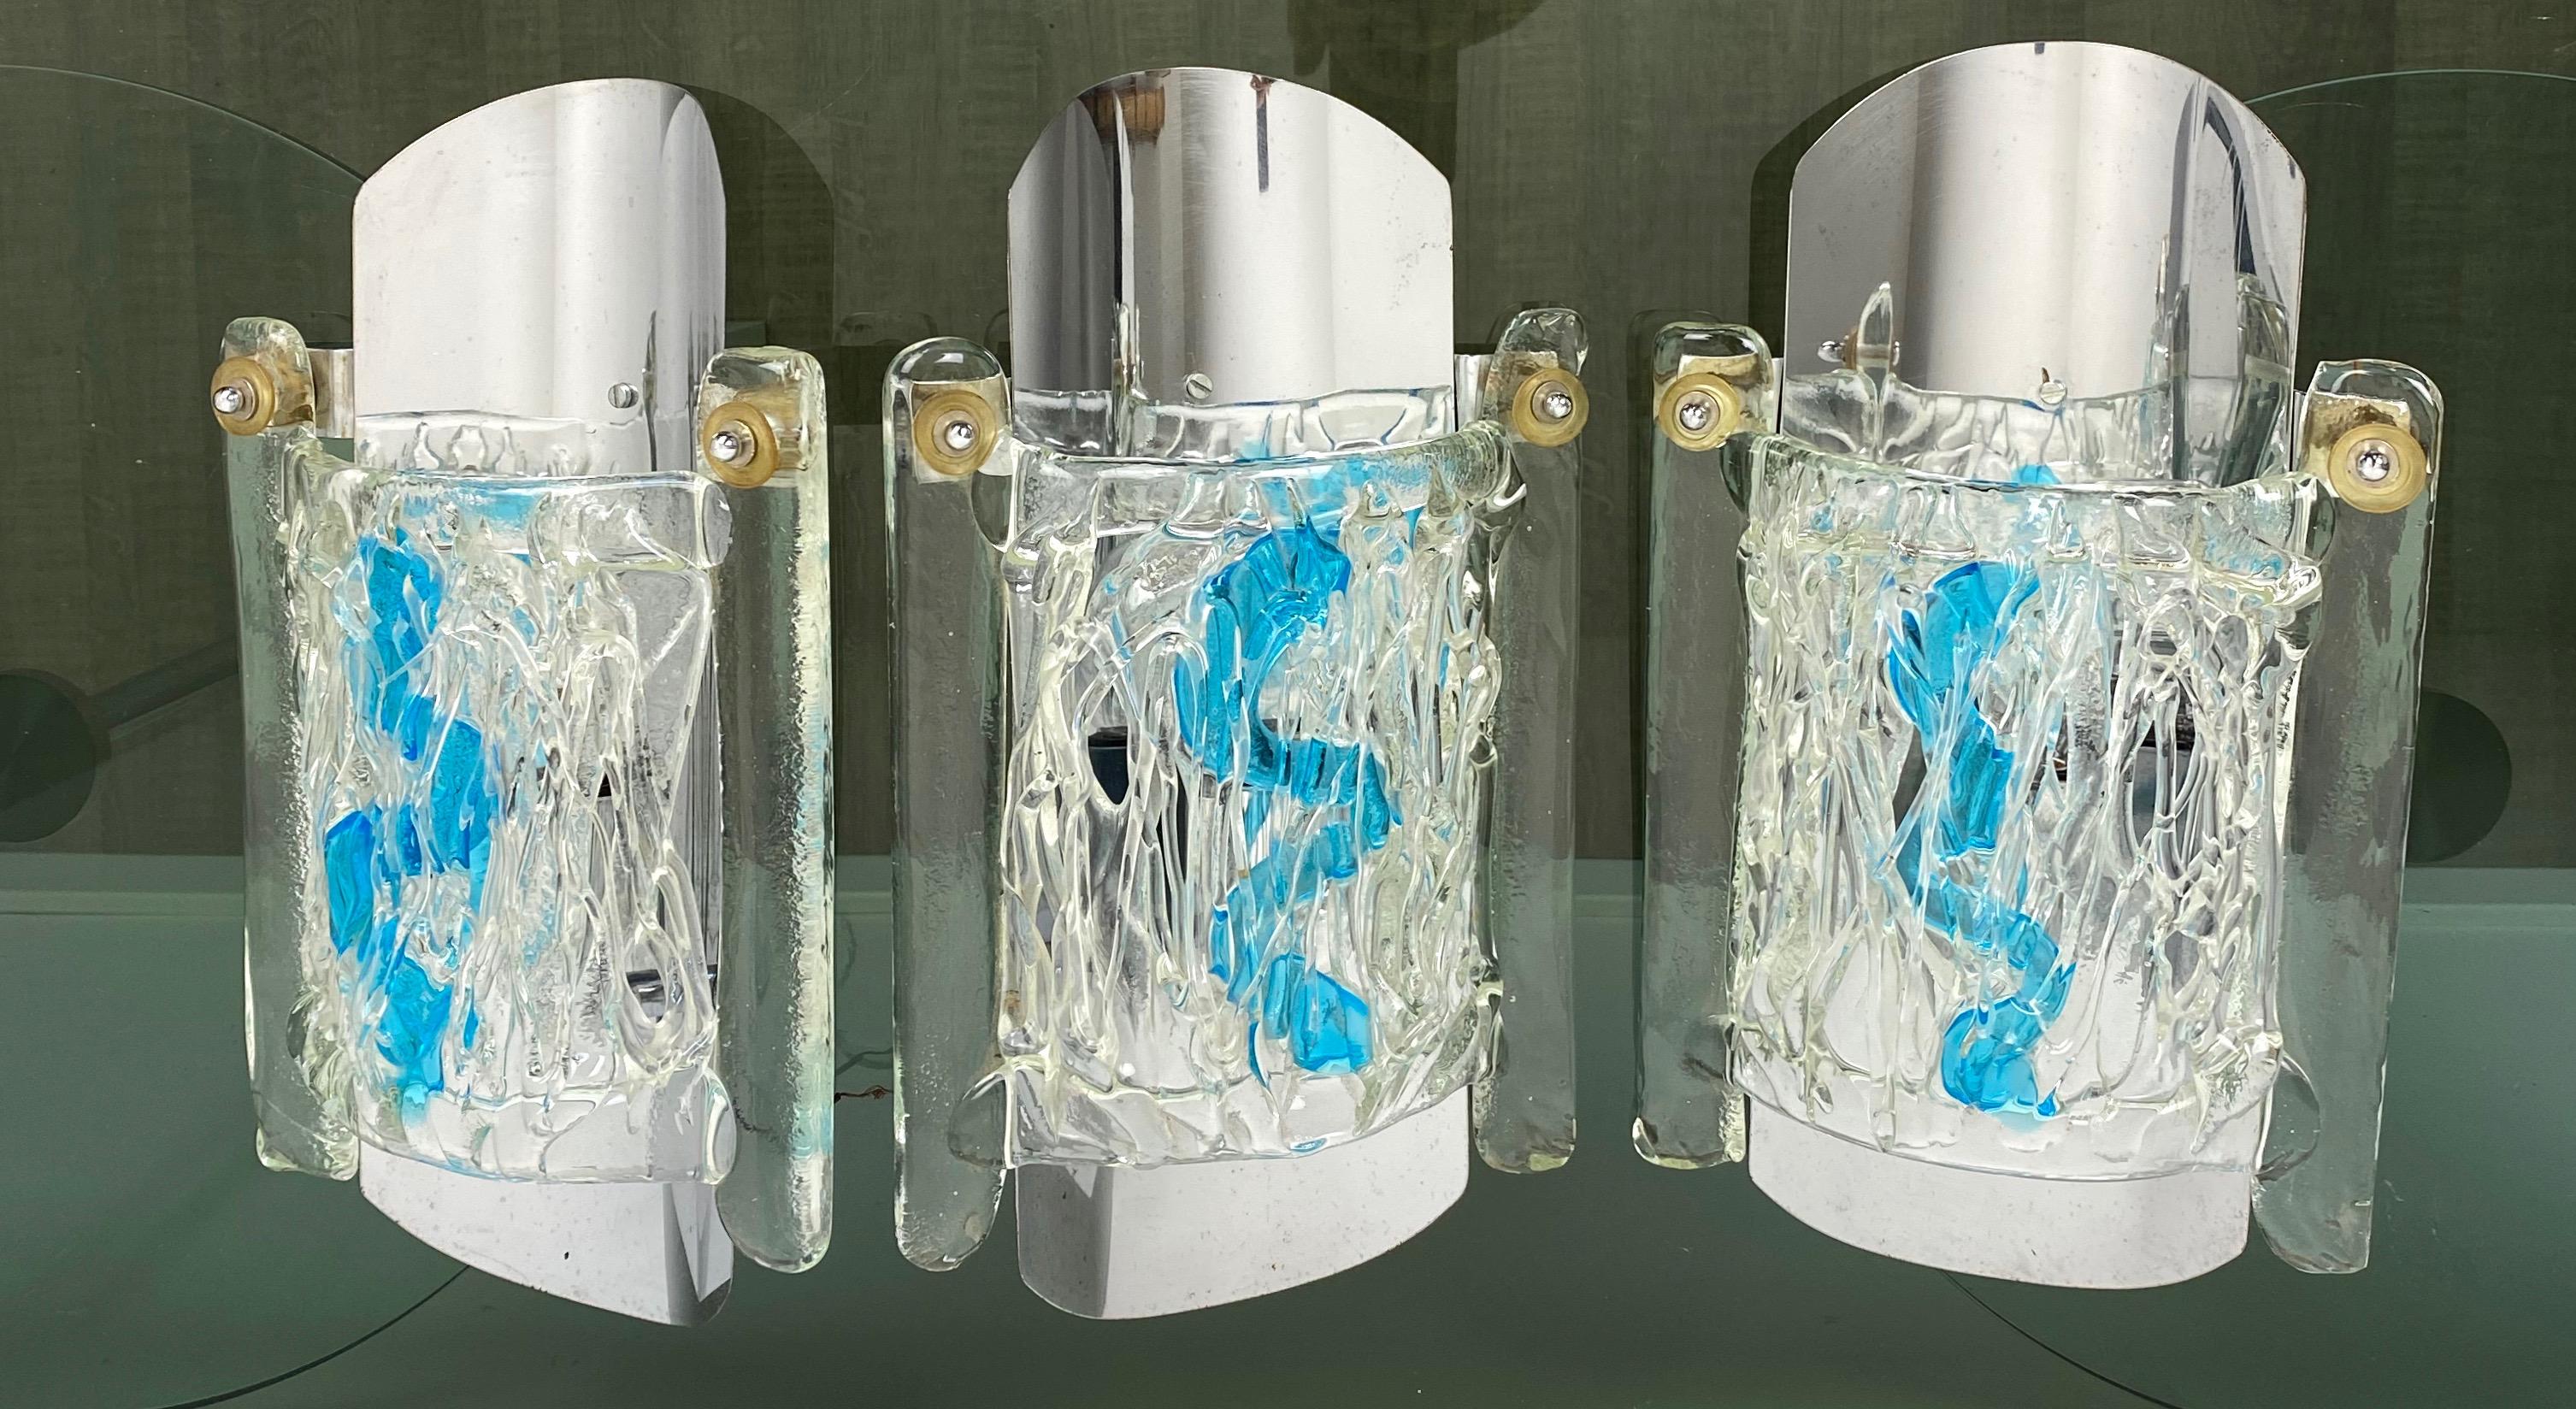 Set of three sconces by the Italian Mazzega made of chrome and Murano glass, all the three embellished with a blue line always in Murano glass. Made in Italy in the 1970s.